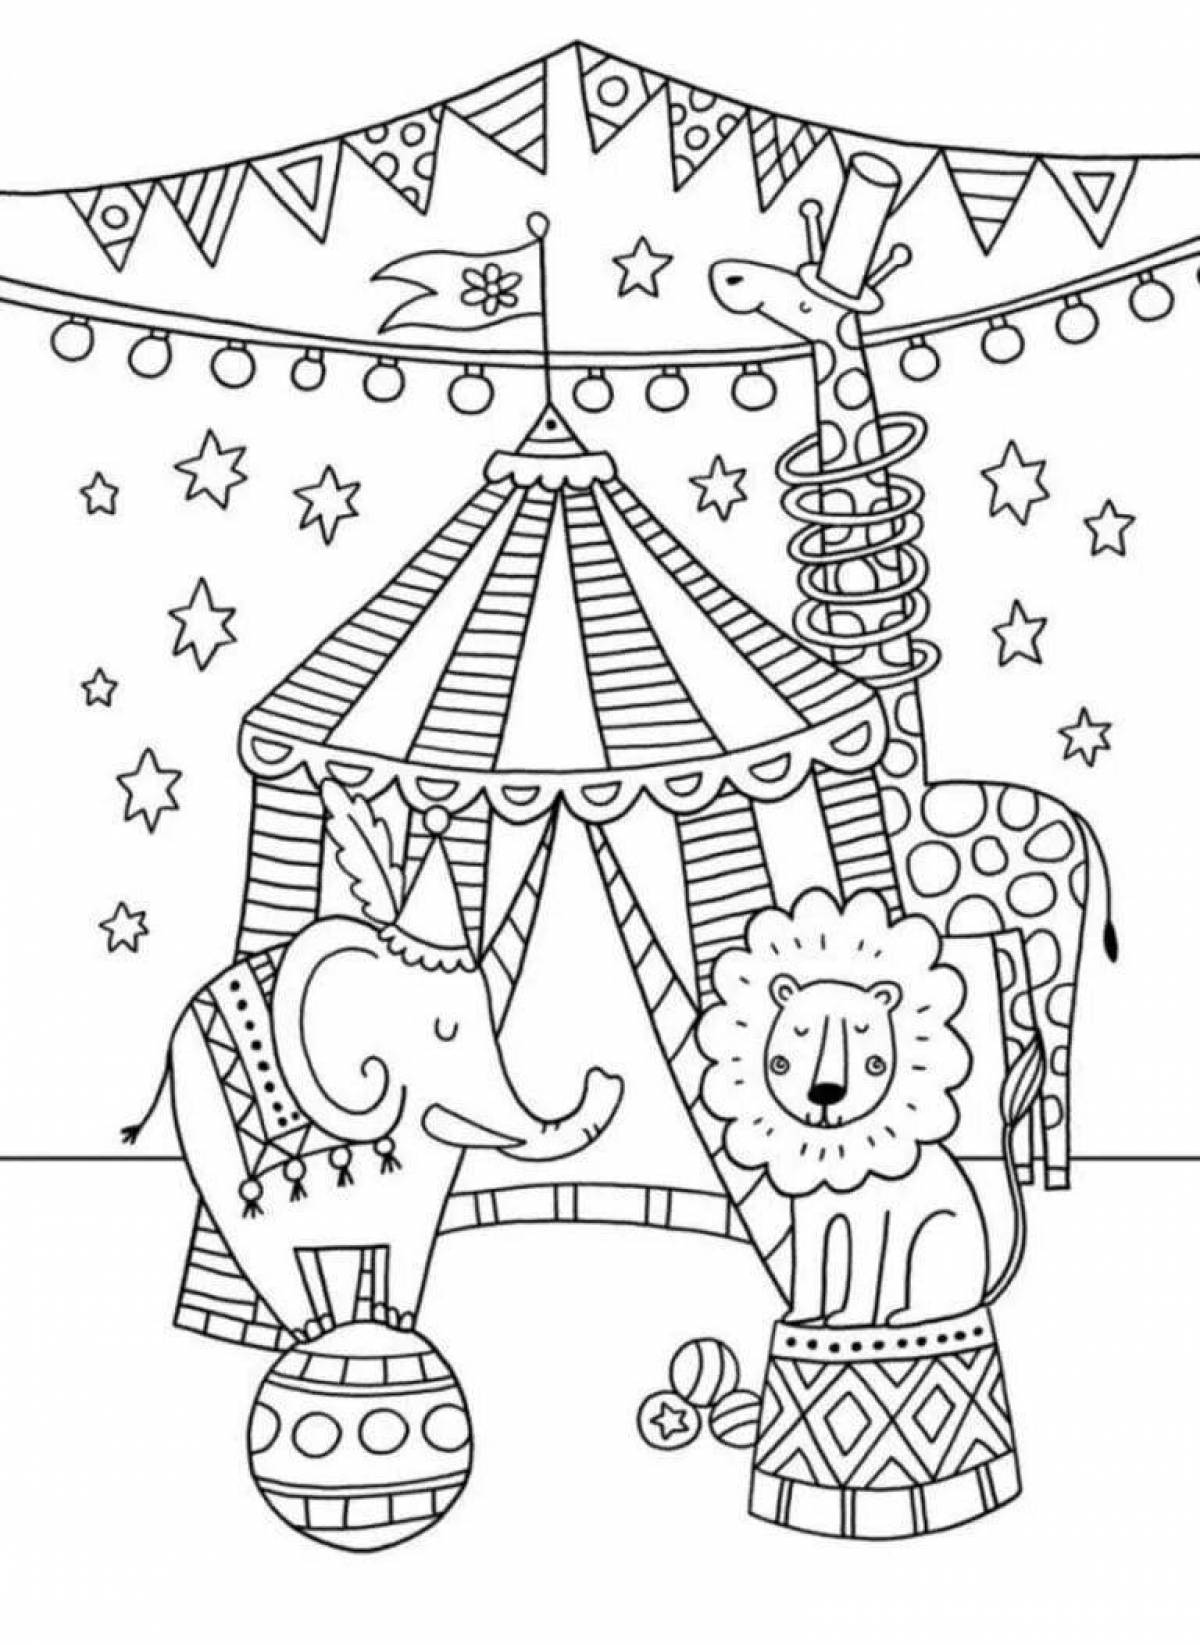 Glorious circus coloring book for kids